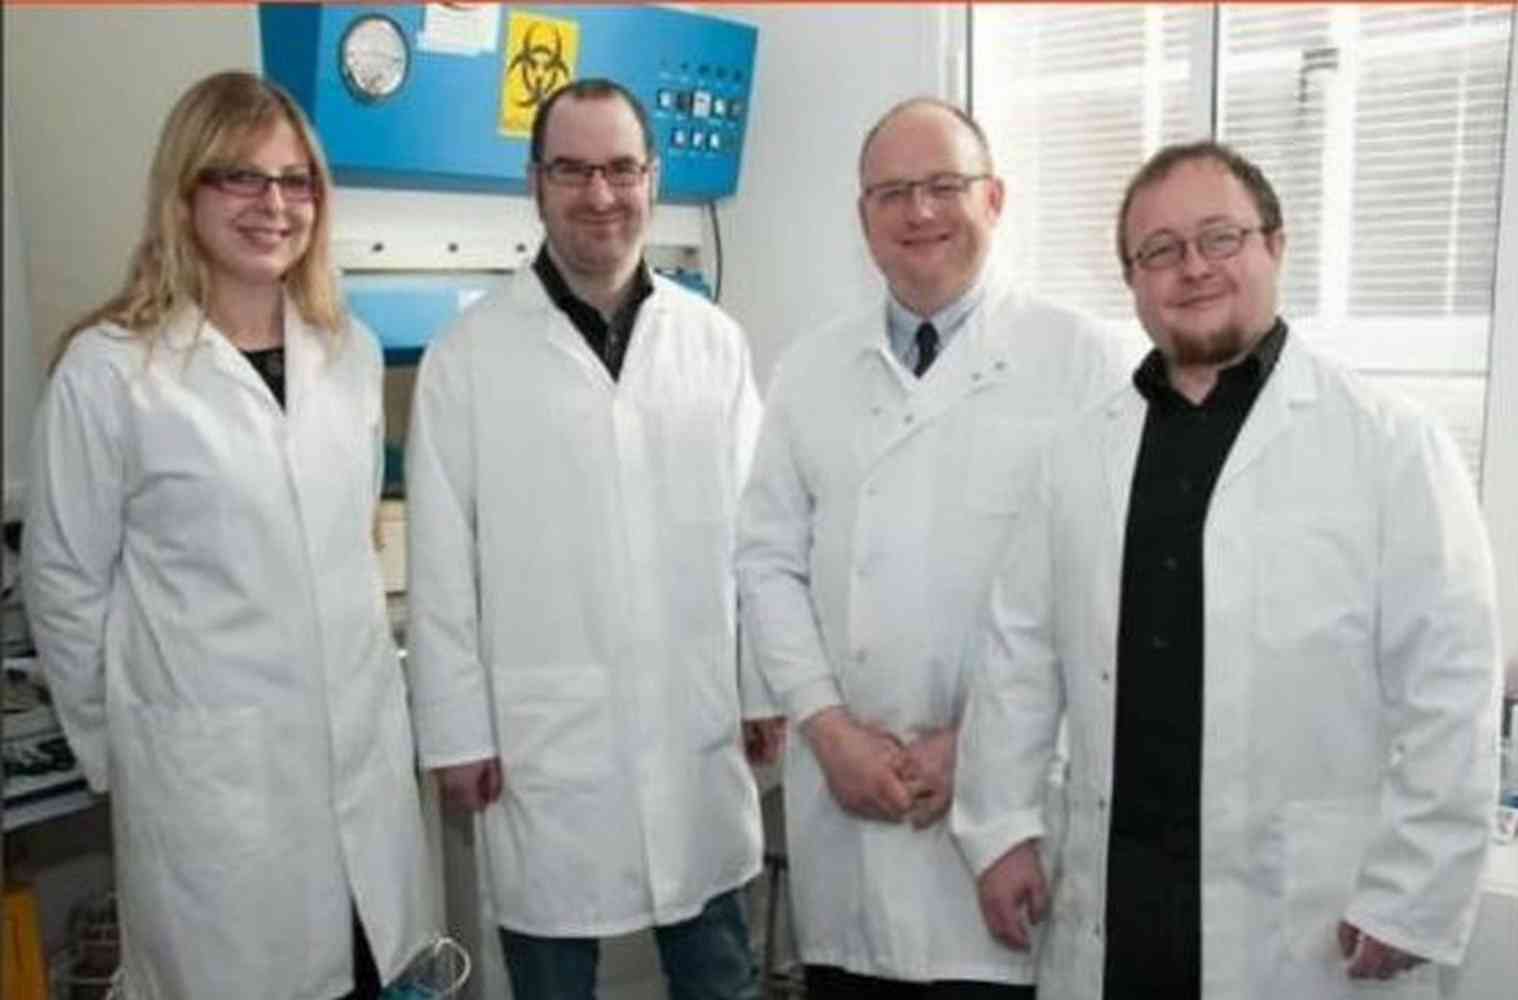 Team LGX from 2014 - Left to right: Dr Lauren Mulcahey-Ryan, Dr Alex Sinclair, Prof Mark Fielder and Dr Adam Le Gresley